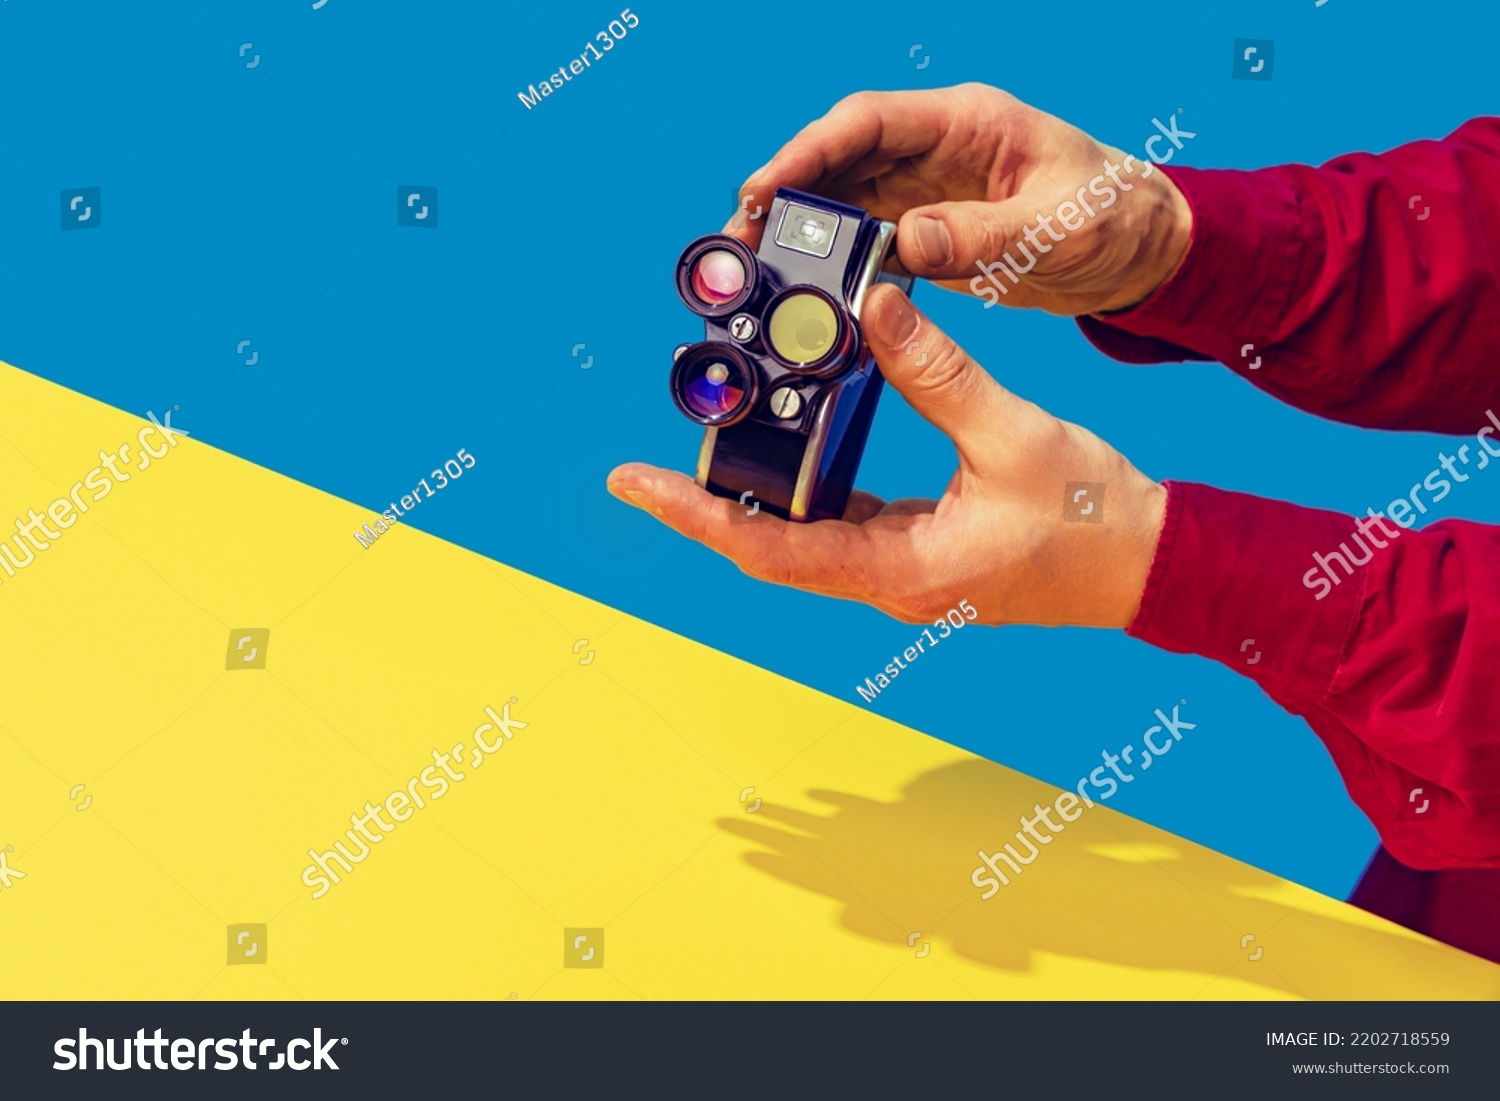 Pop art photography. Colorful image of retro photo camera on bright yellow tablecloth isolated over blue background. Concept of art culture, vintage things, mix old and modernity. Copy space for ad #2202718559